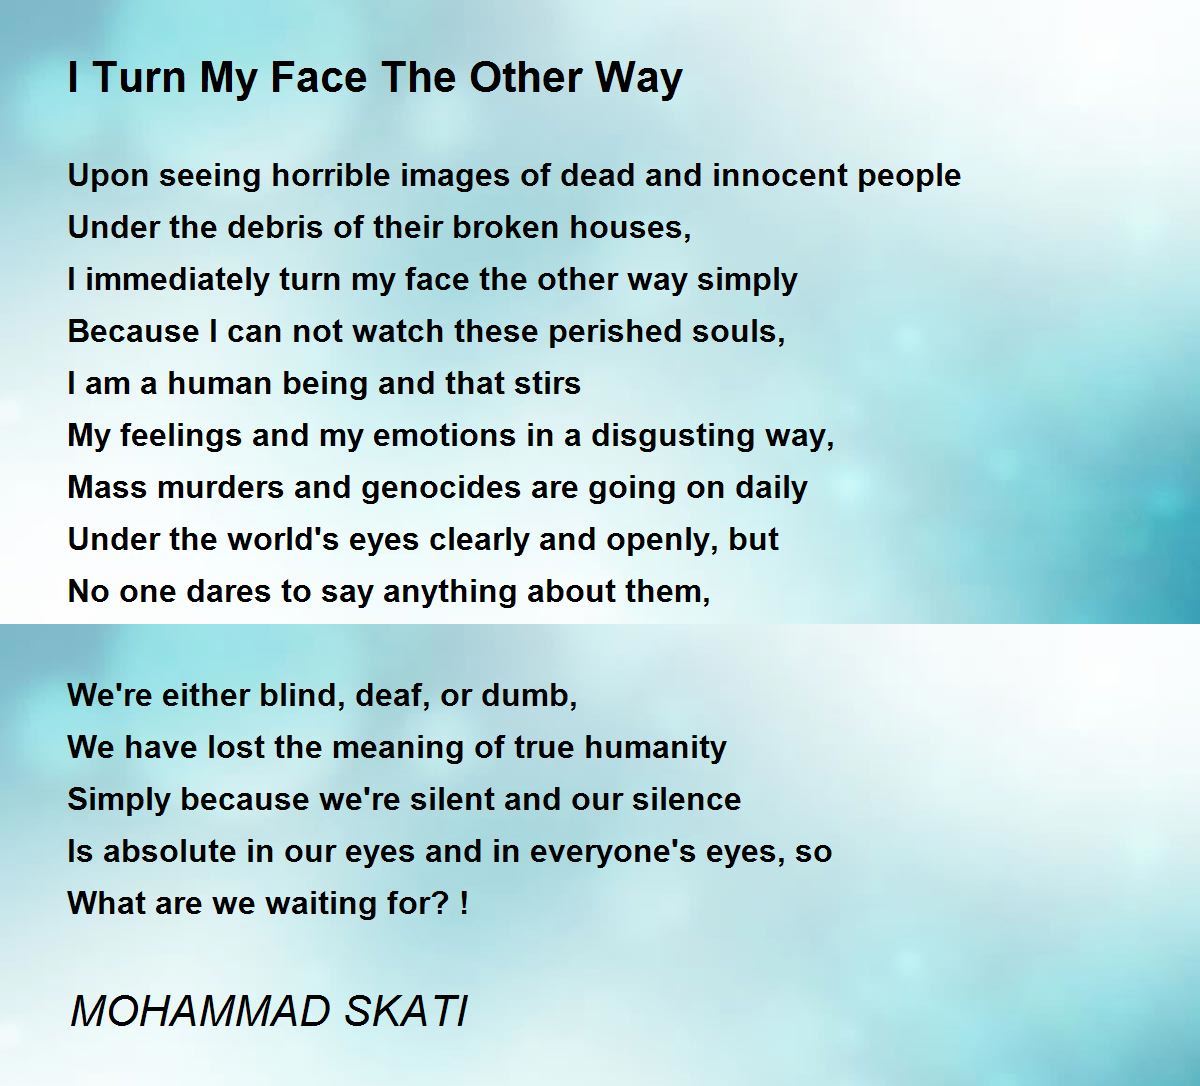 I Turn My Face The Other Way - I Turn My Face The Other Way Poem